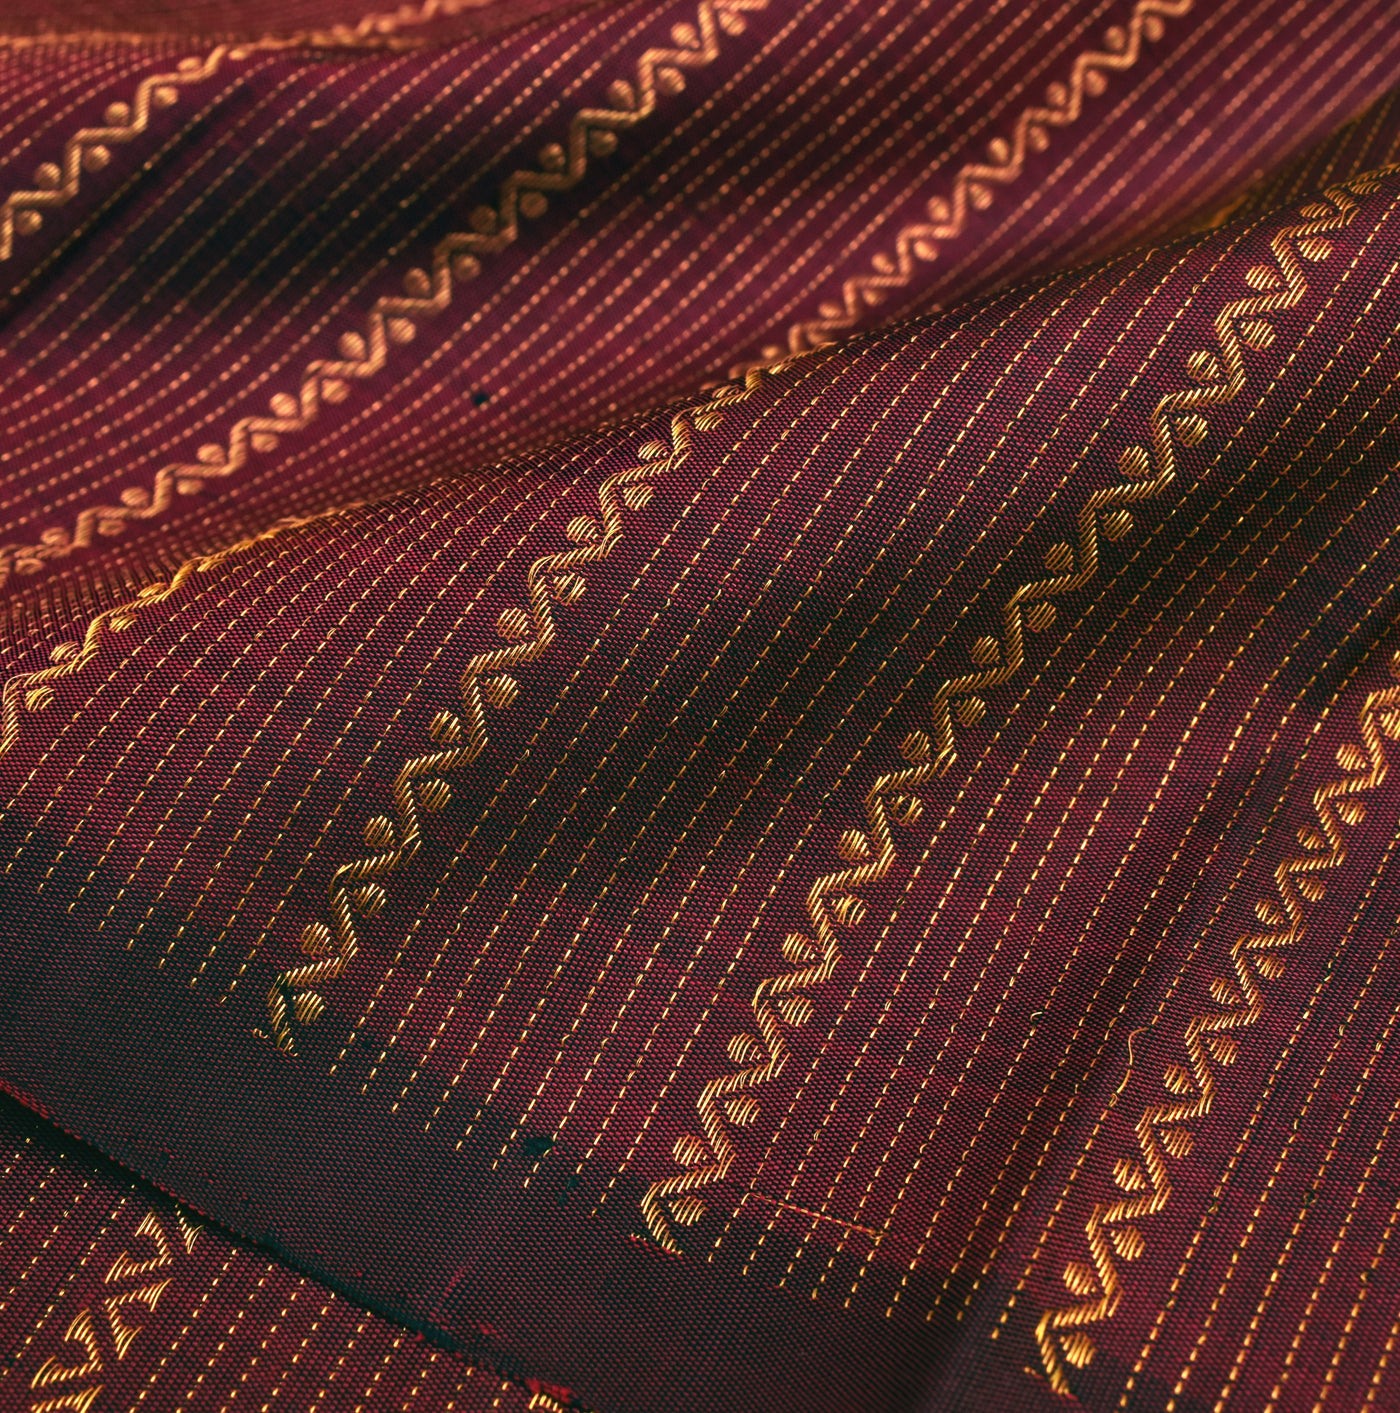 Maroon Kanchi Silk Fabric with Neli and Lines Design